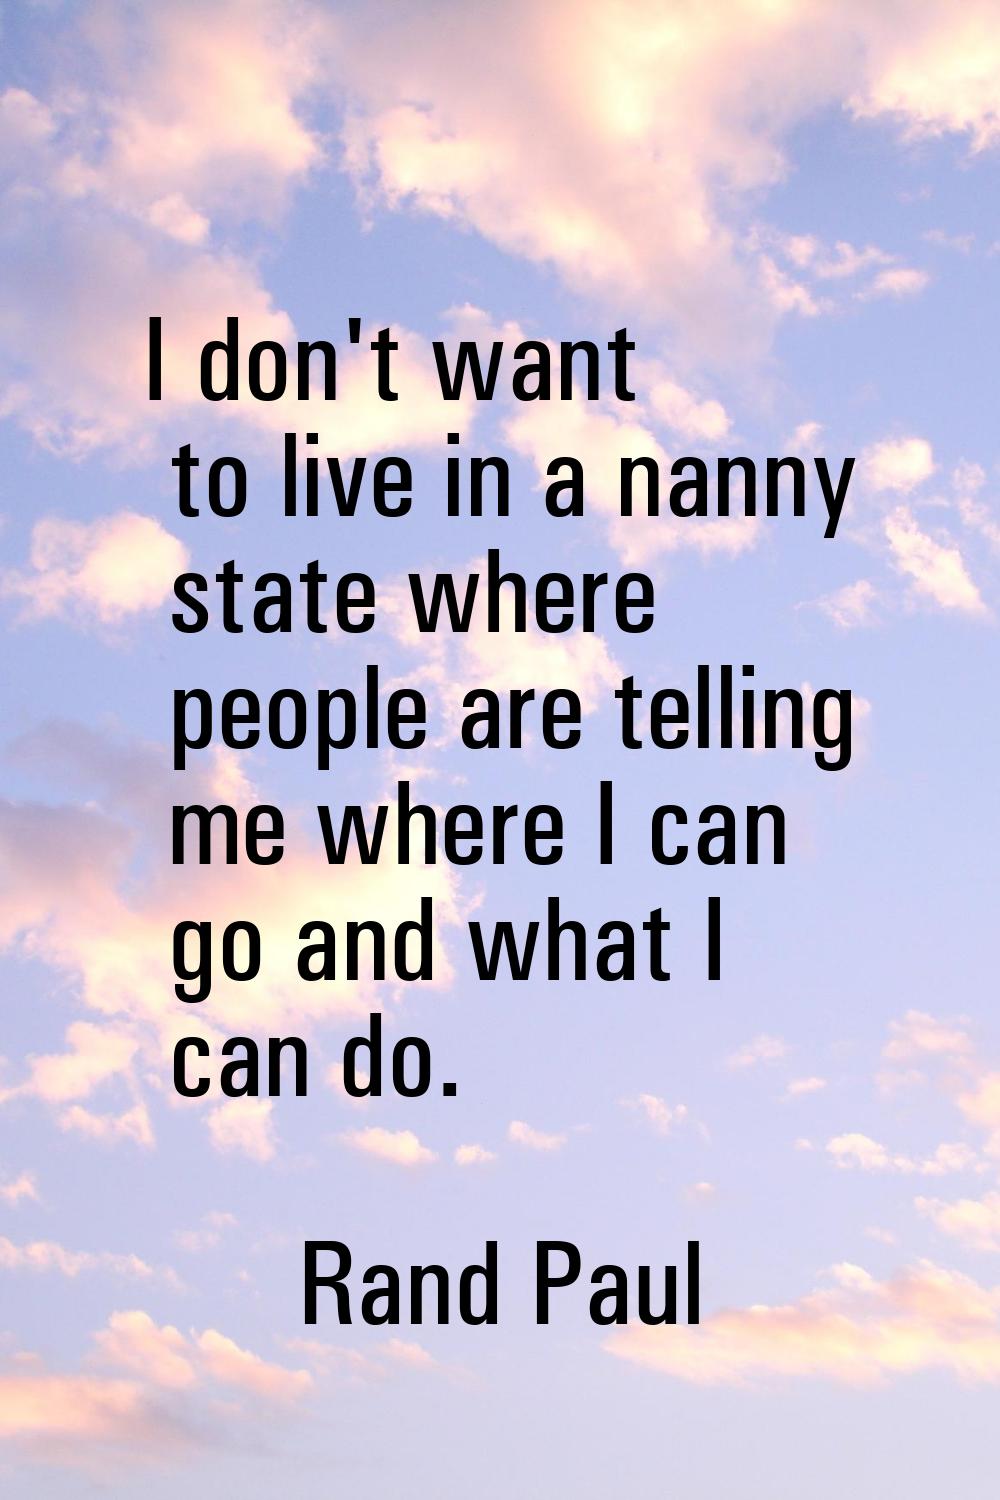 I don't want to live in a nanny state where people are telling me where I can go and what I can do.